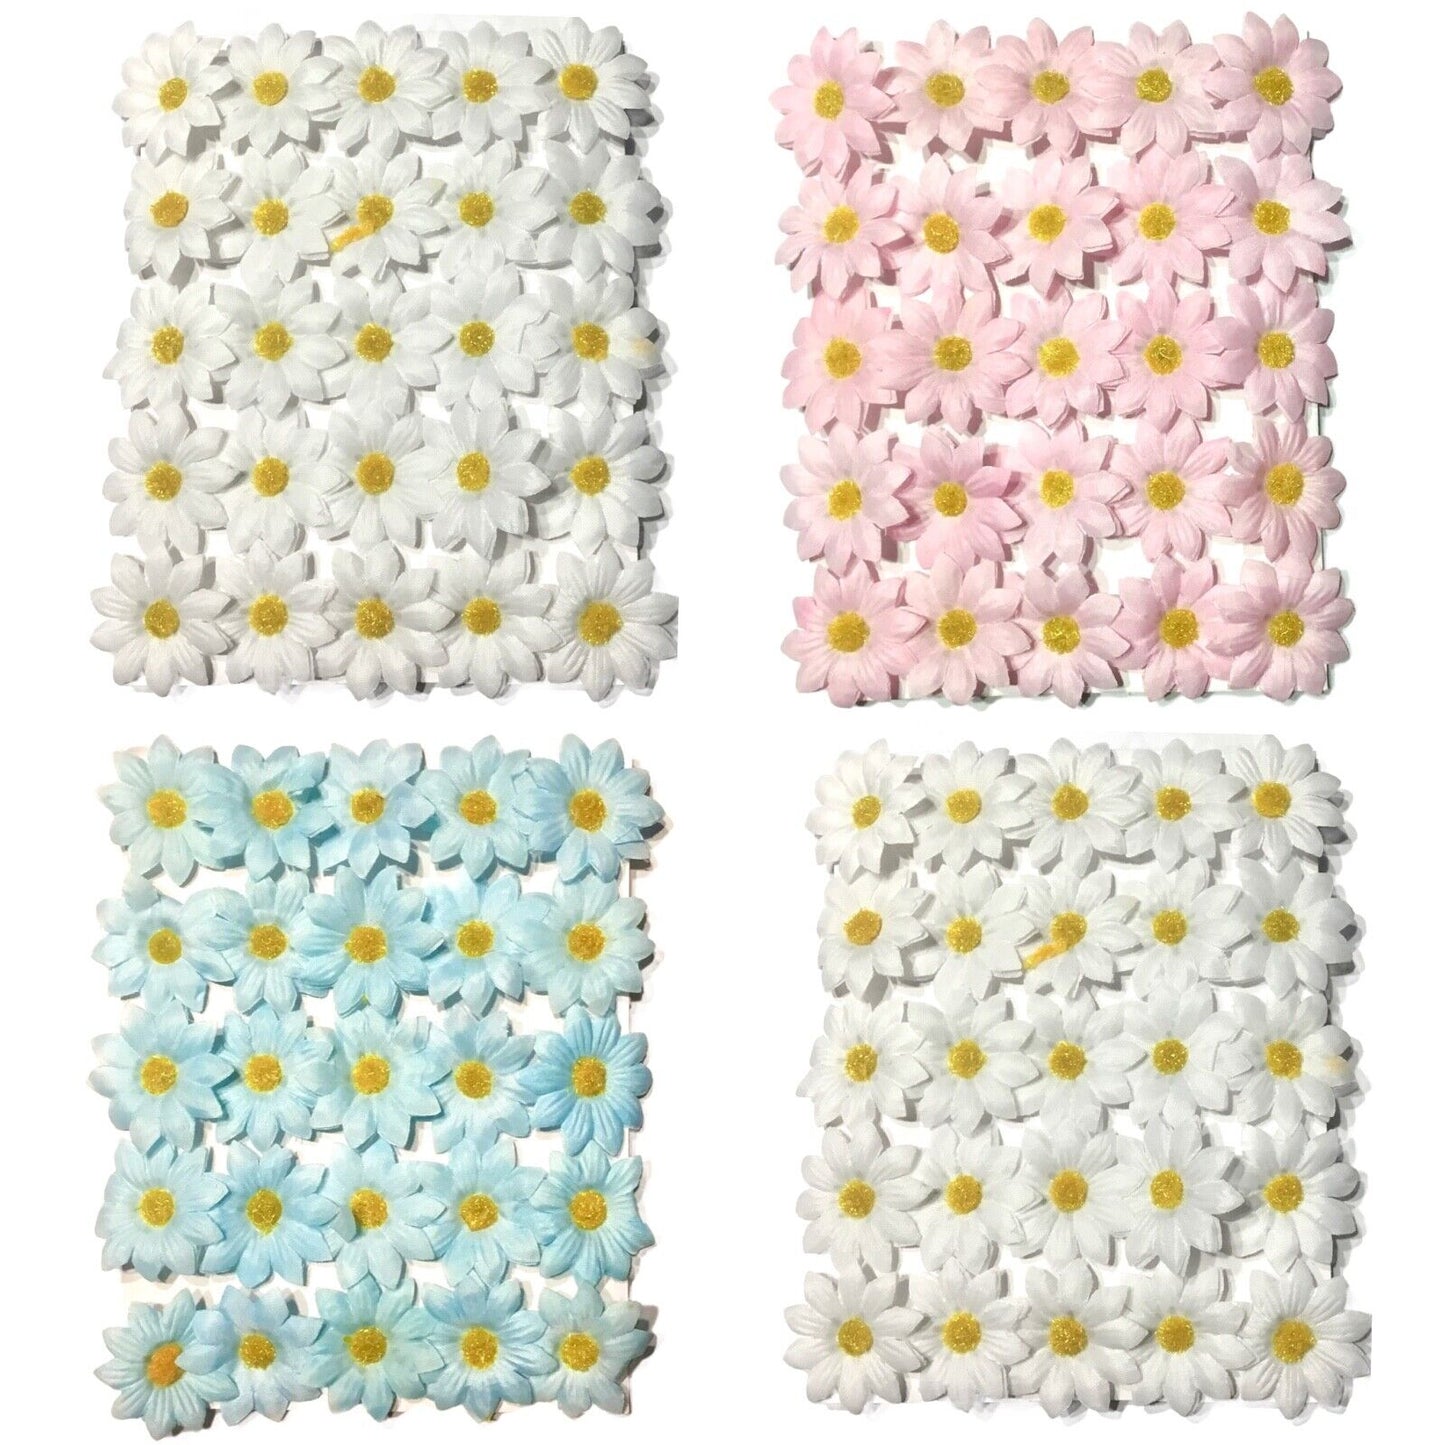 25pc Easter Daisy Flower 40mm - Pick your Colour